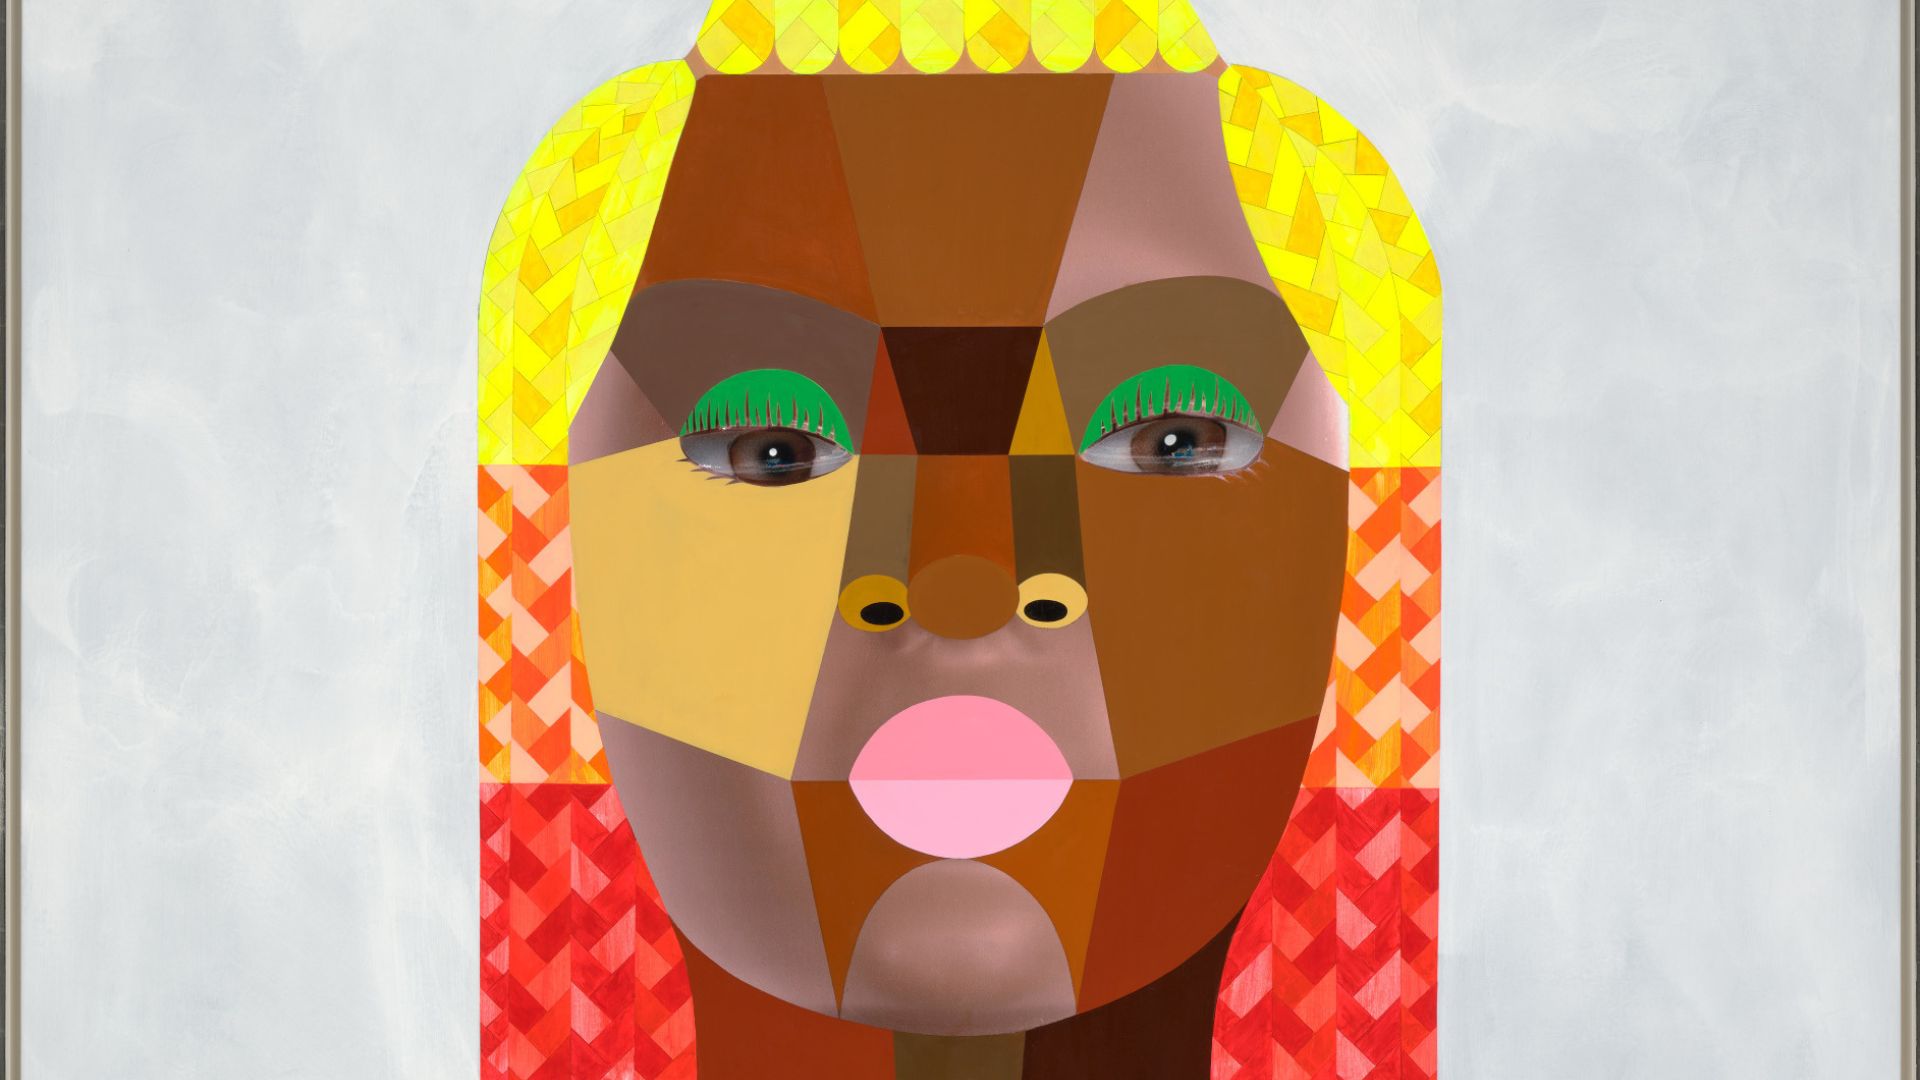 Derrick Adams artwork features a beautiful Black woman with skin tones and hair colors.